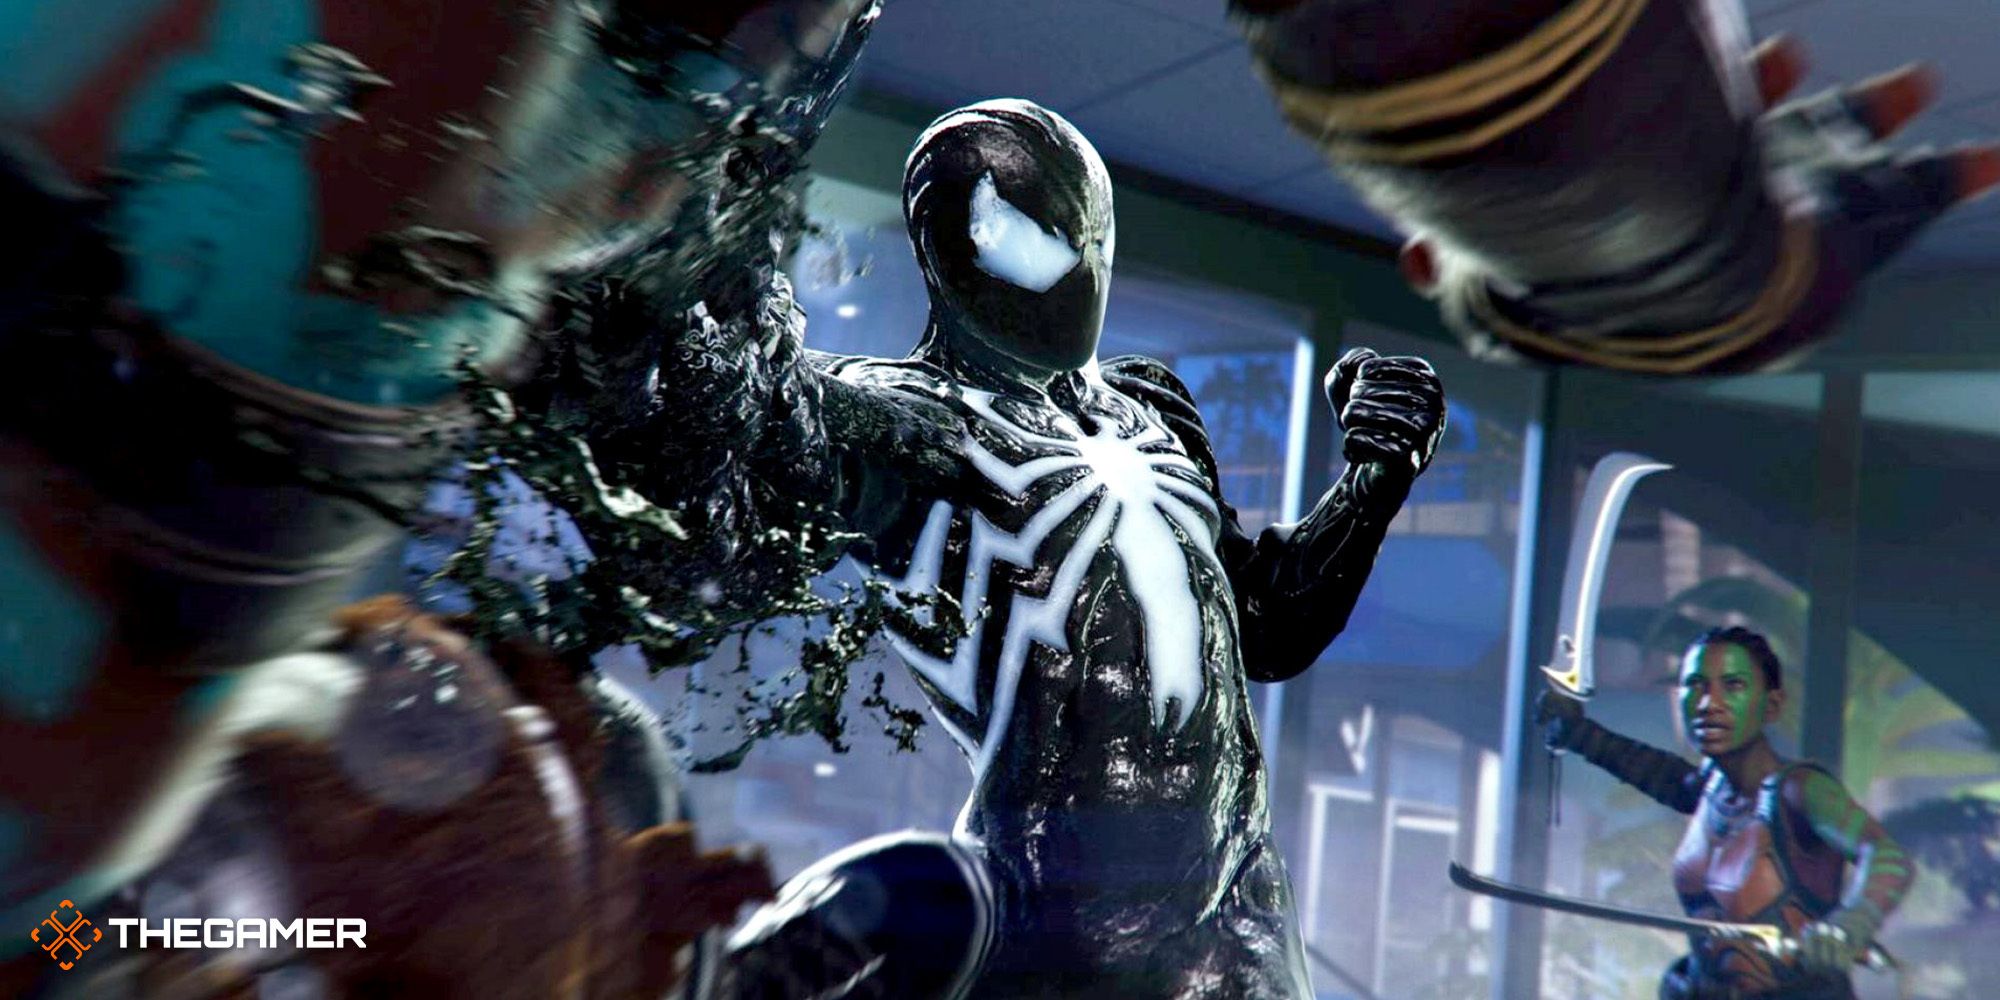 Symbiote suit Spider-Man punching a goon with a gooey fist as another Hunter runs up behind him with blades drawn.